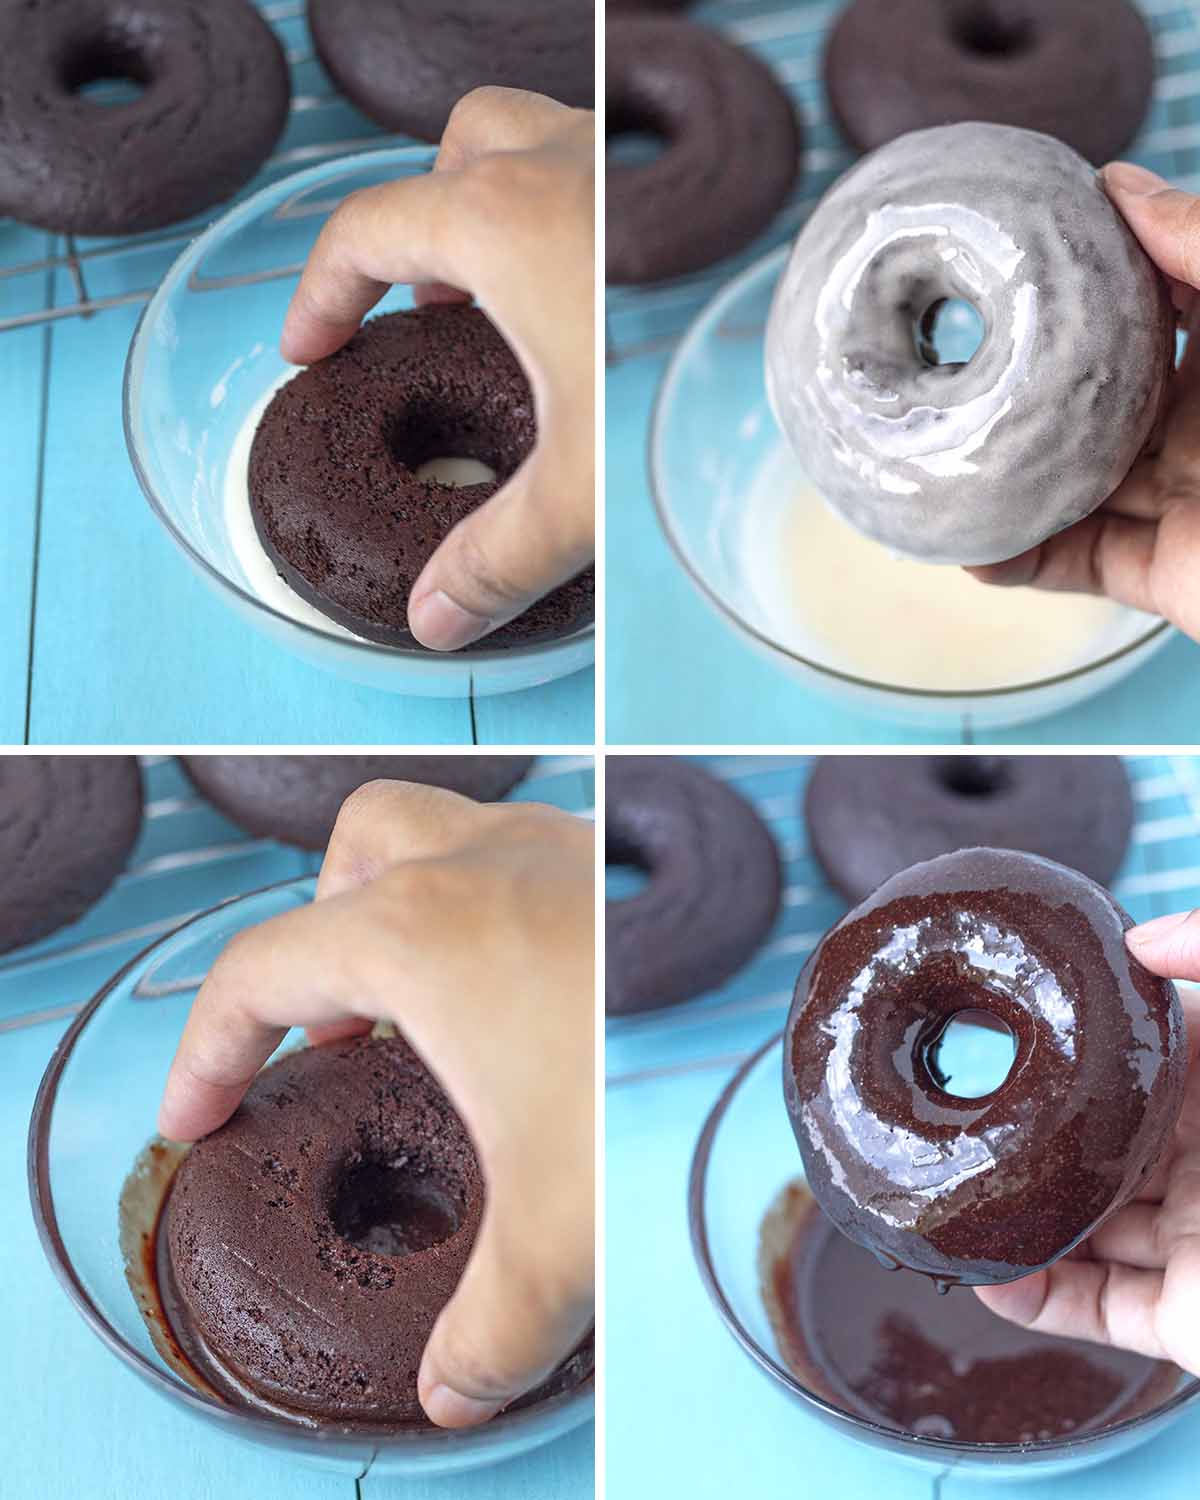 A collage of four images showing vegan chocolate doughnuts being dipped into two different glazes: chocolate and sugar.